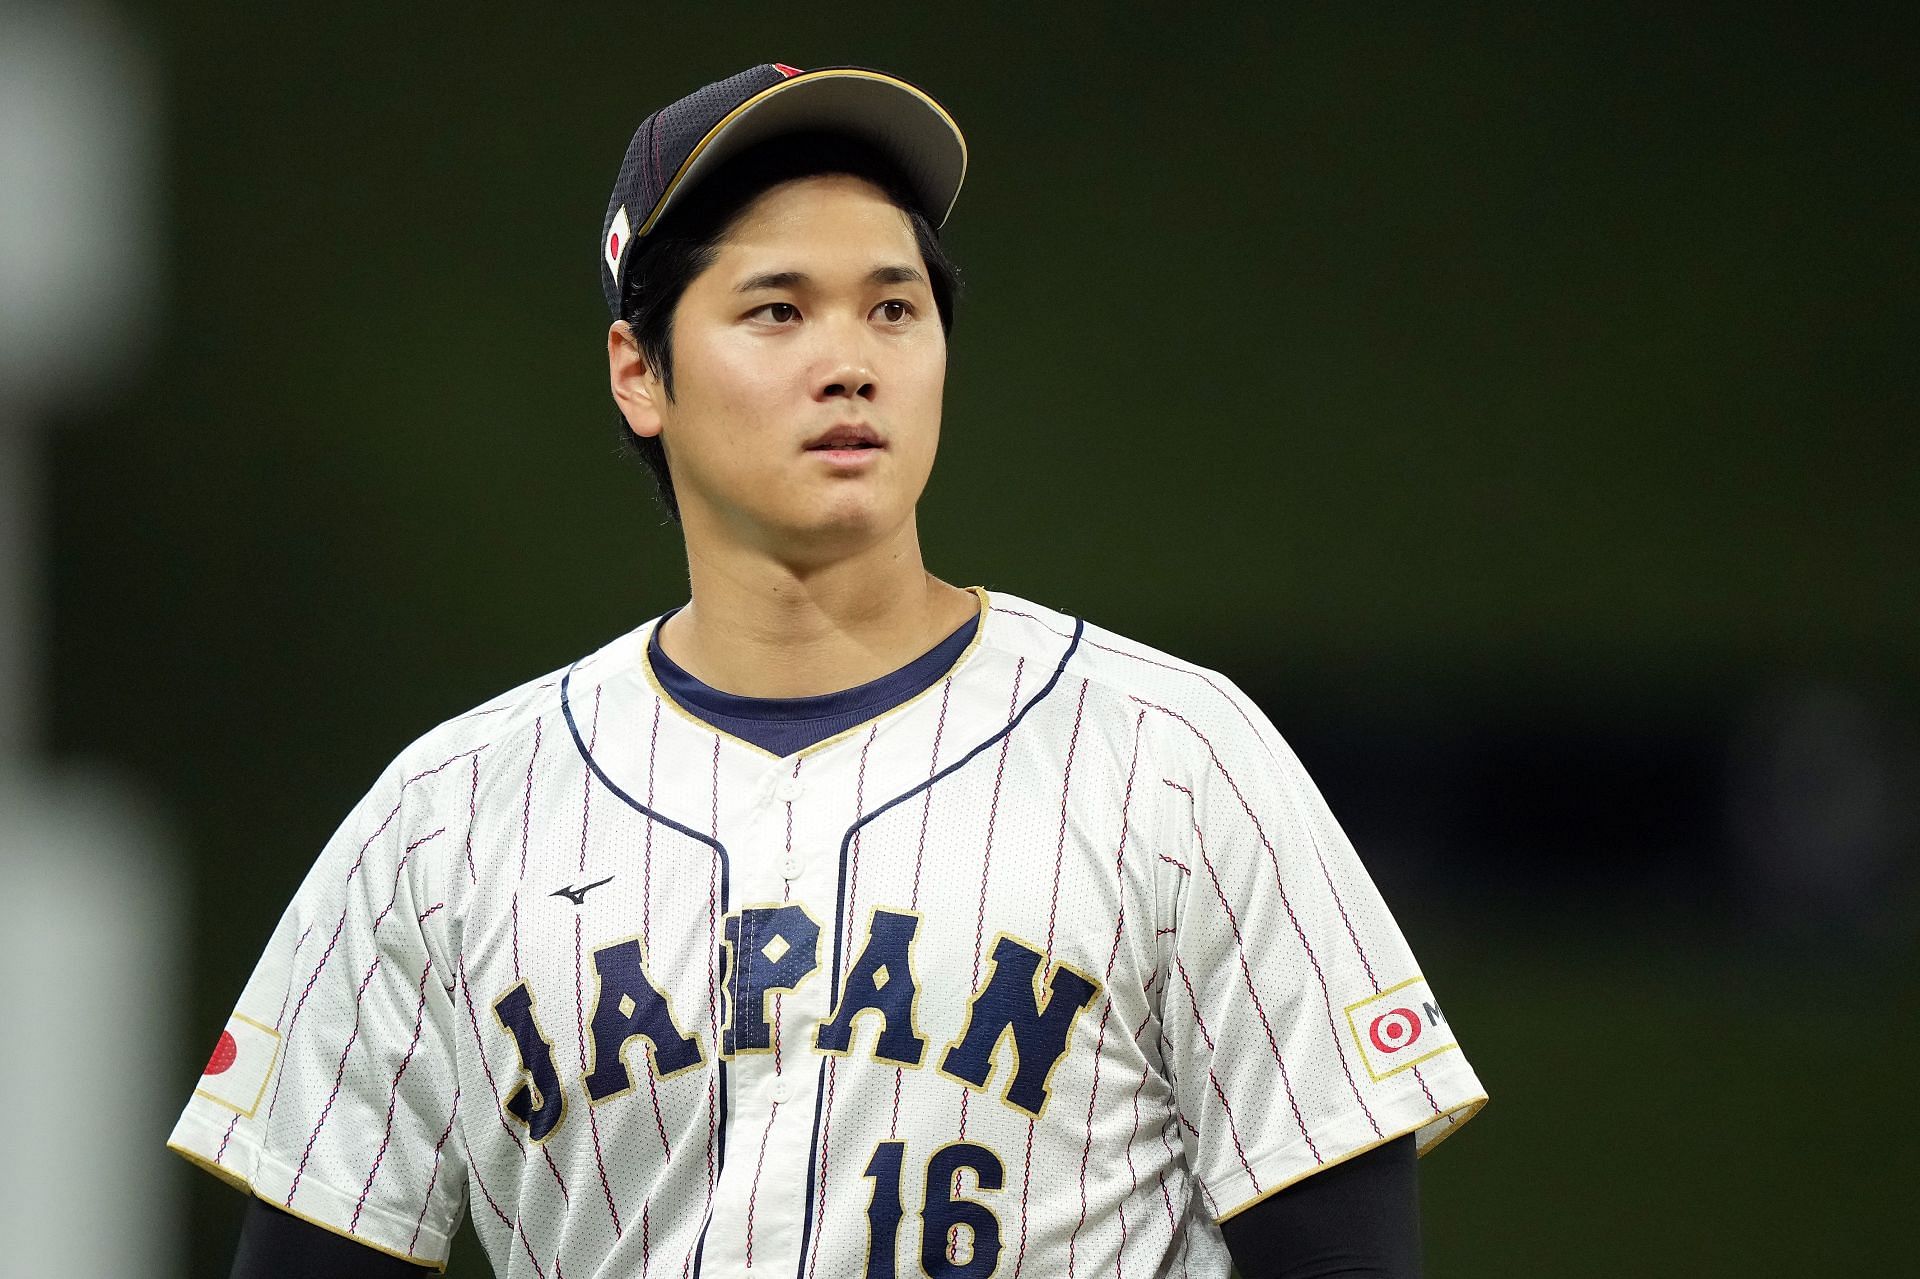 This fan tweeted at the Mets GM to sign Ohtani in 2012 🤯 He wasn't signed  by an MLB team until 2017. (via draftniks/TW)